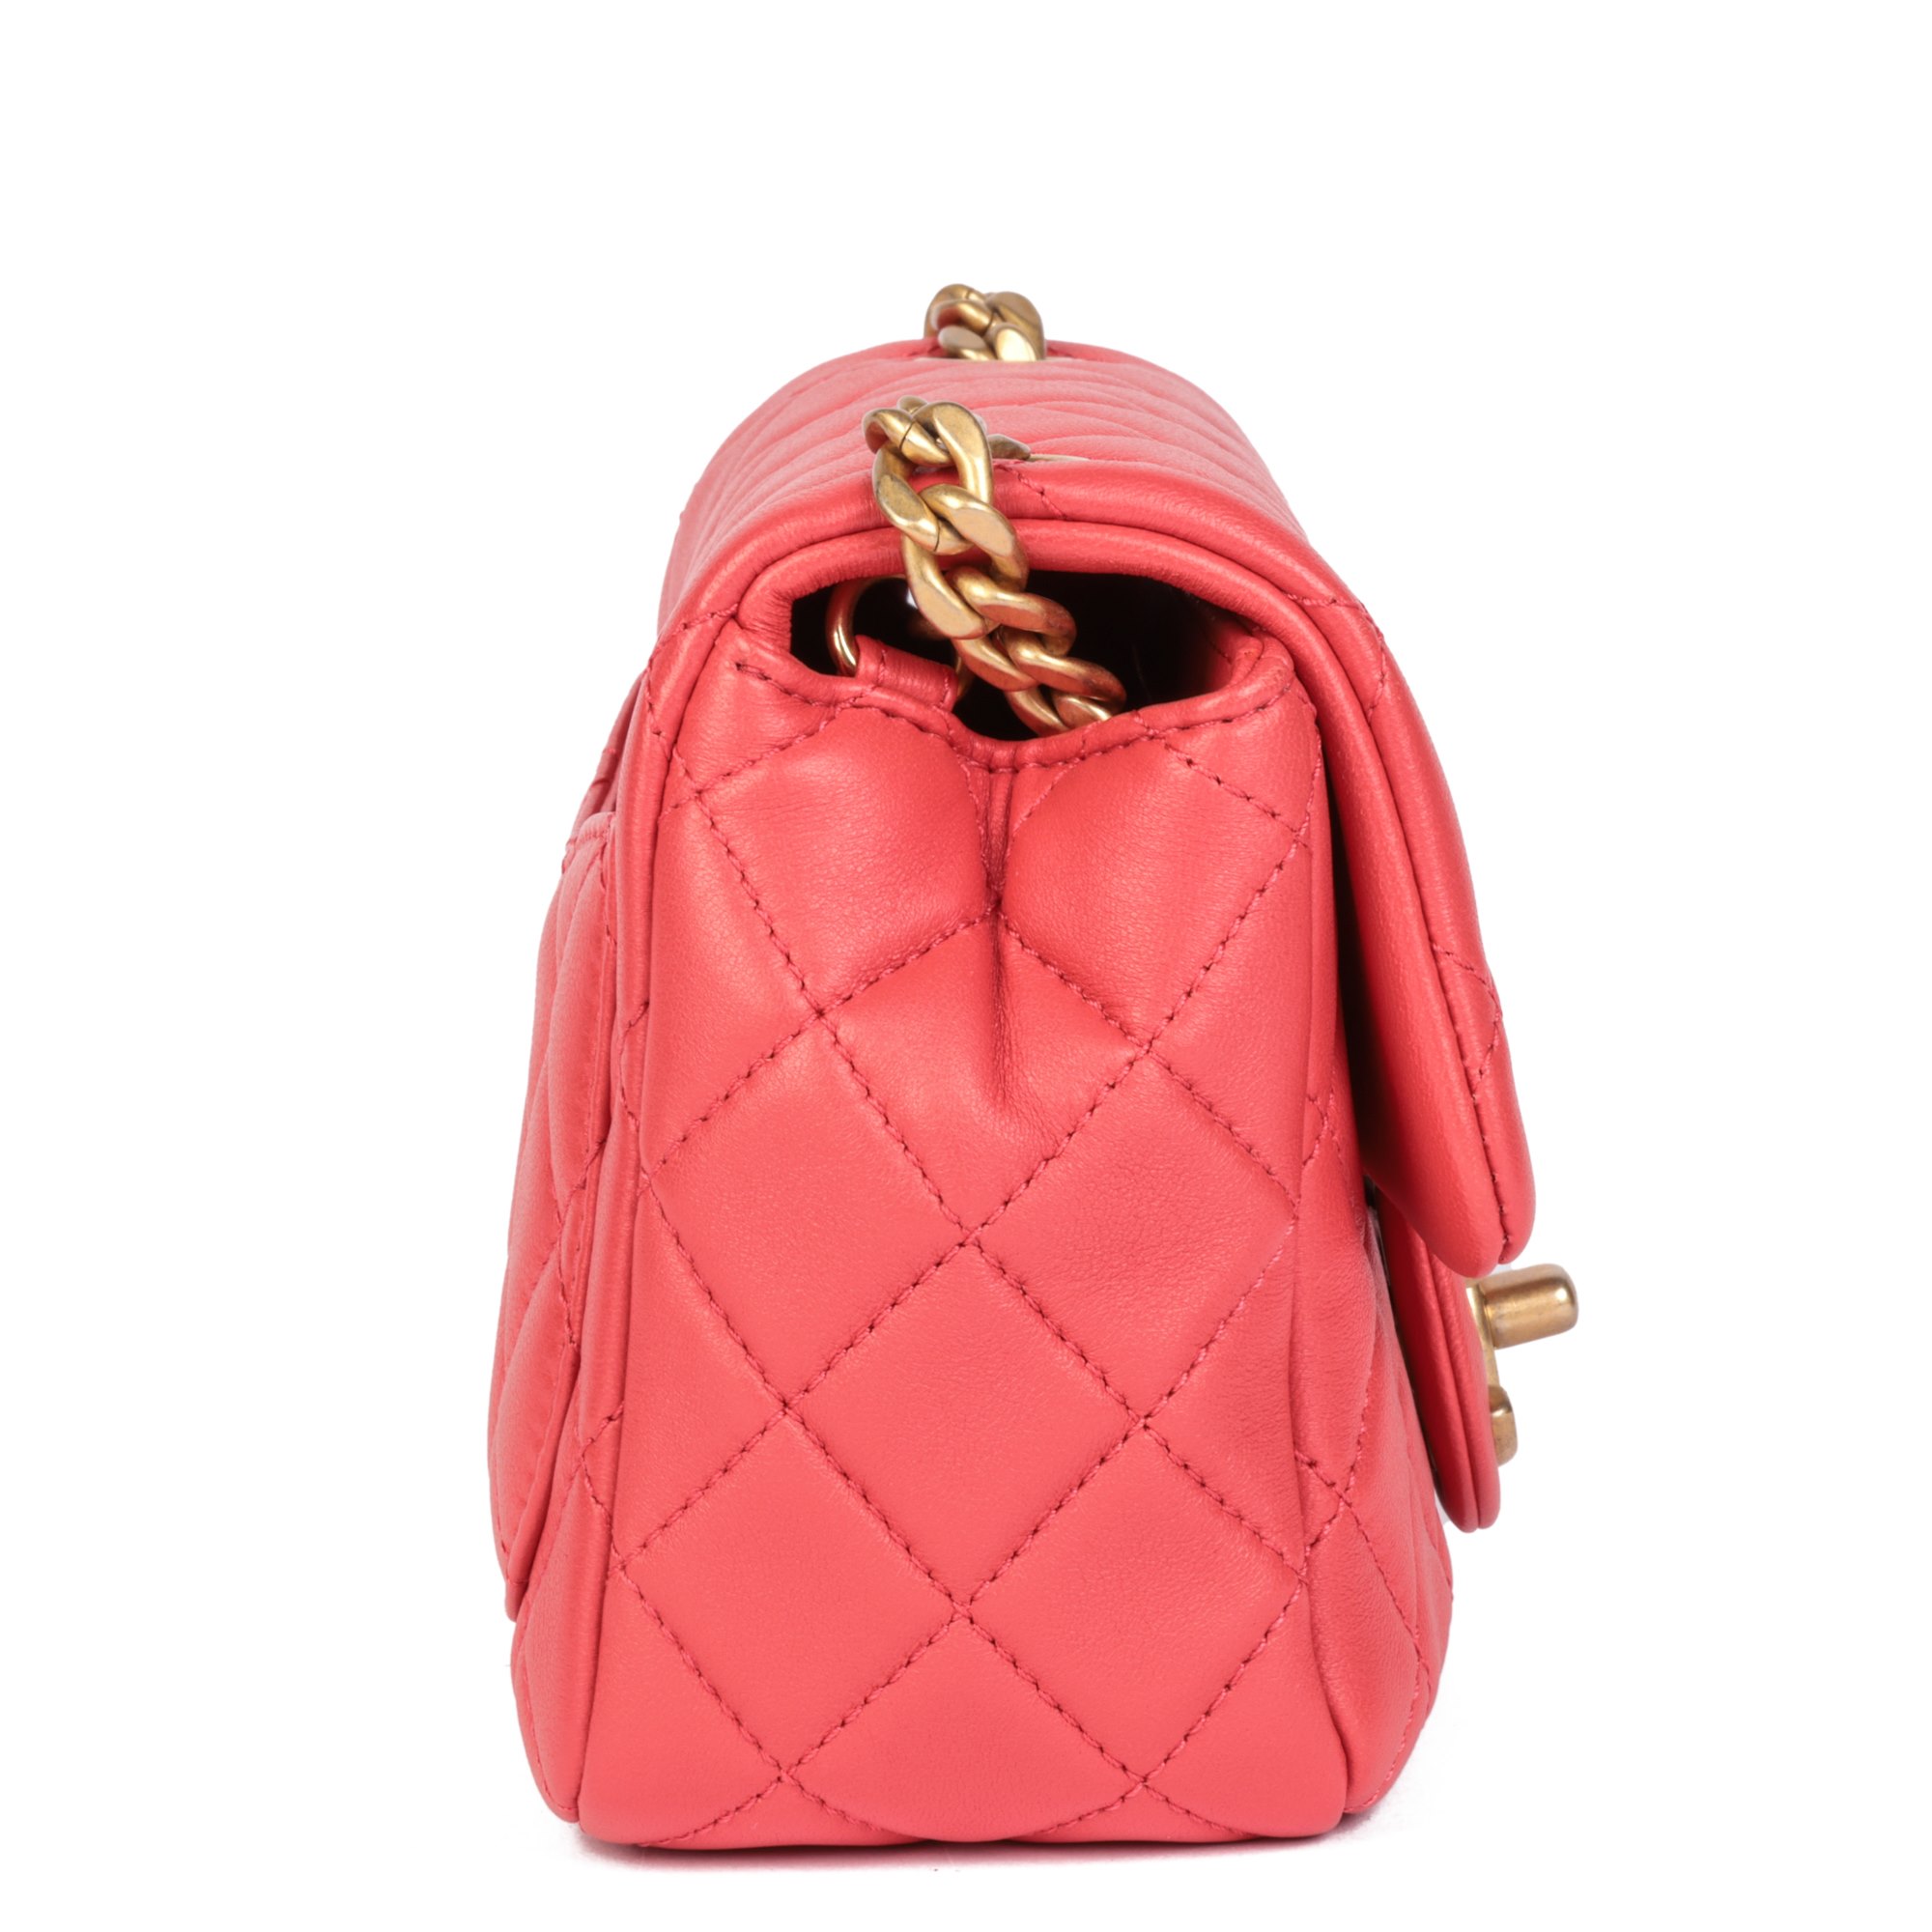 Chanel Coral Red Quilted Lambskin Jewels Square Mini Flap Bag